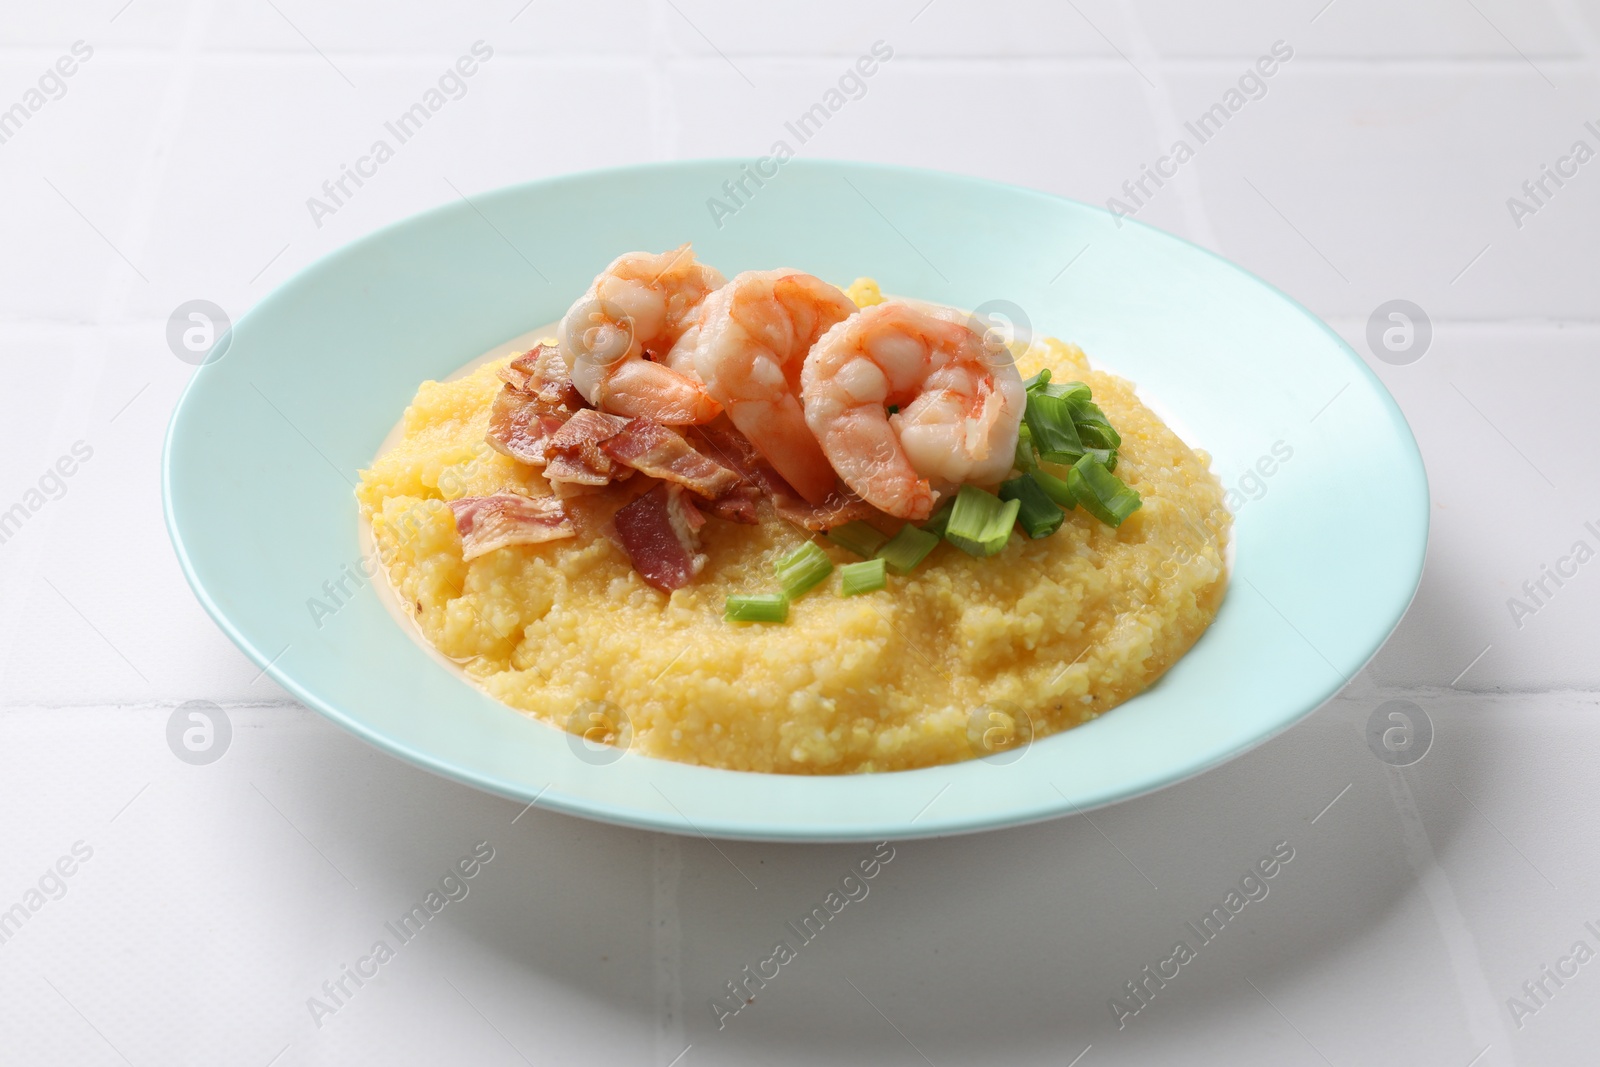 Photo of Plate with fresh tasty shrimps, bacon, grits and green onion on white tiled table